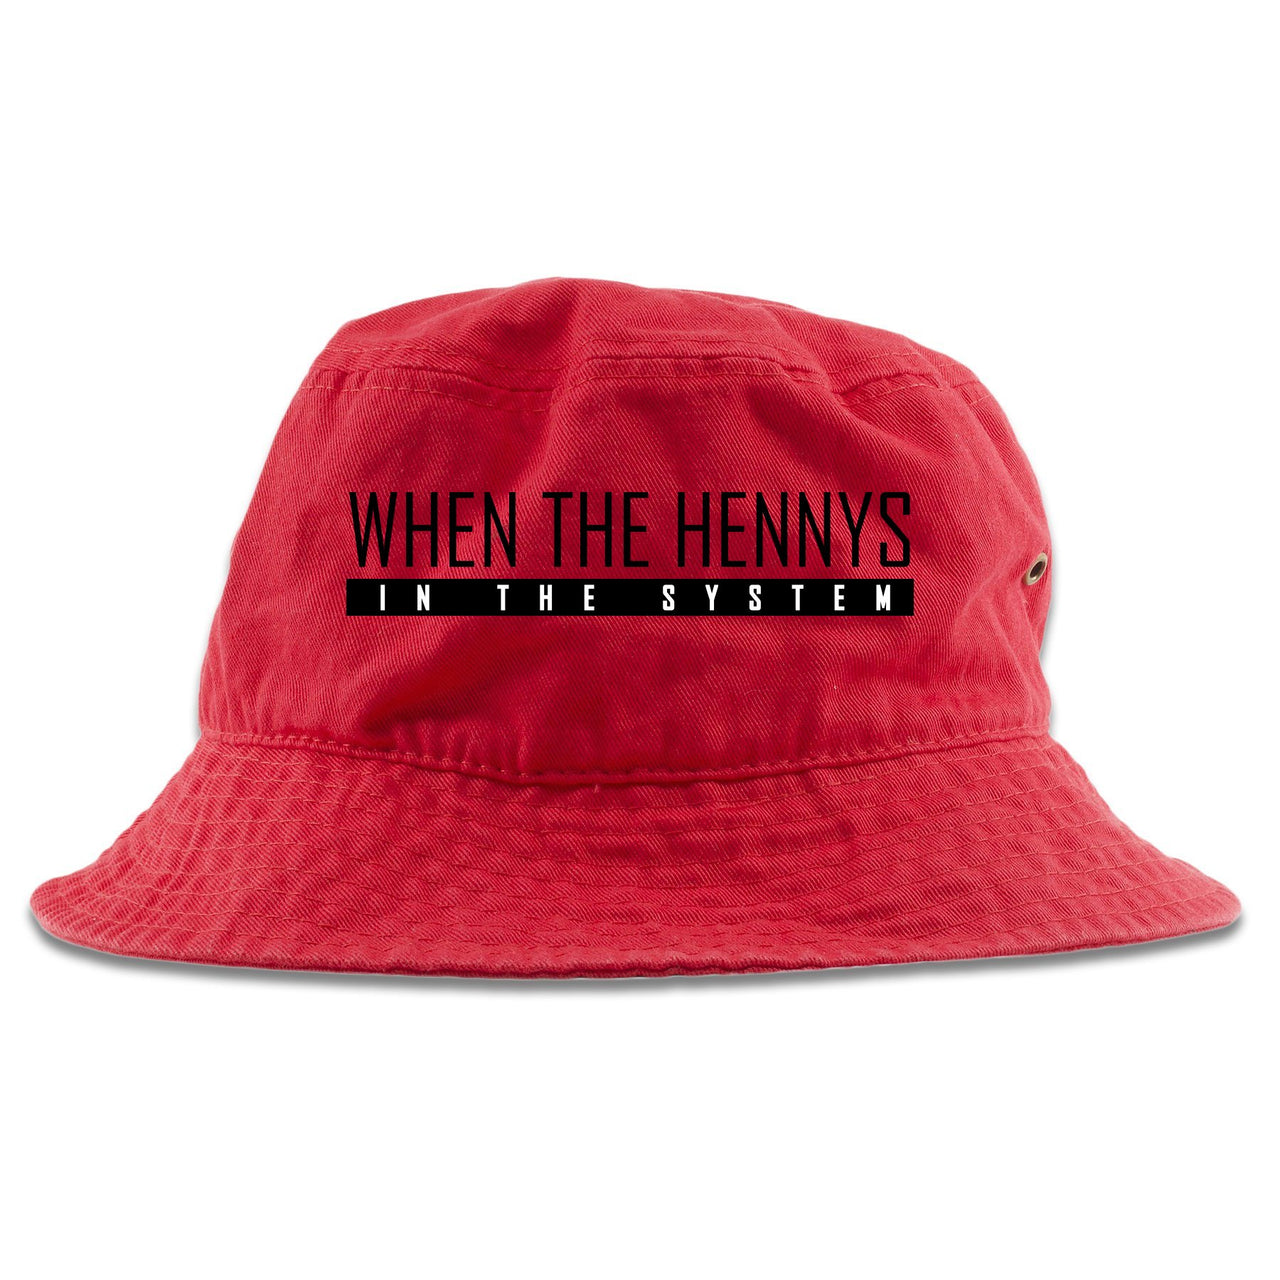 Bred 2019 4s Bucket Hat | When the Hennys, Red